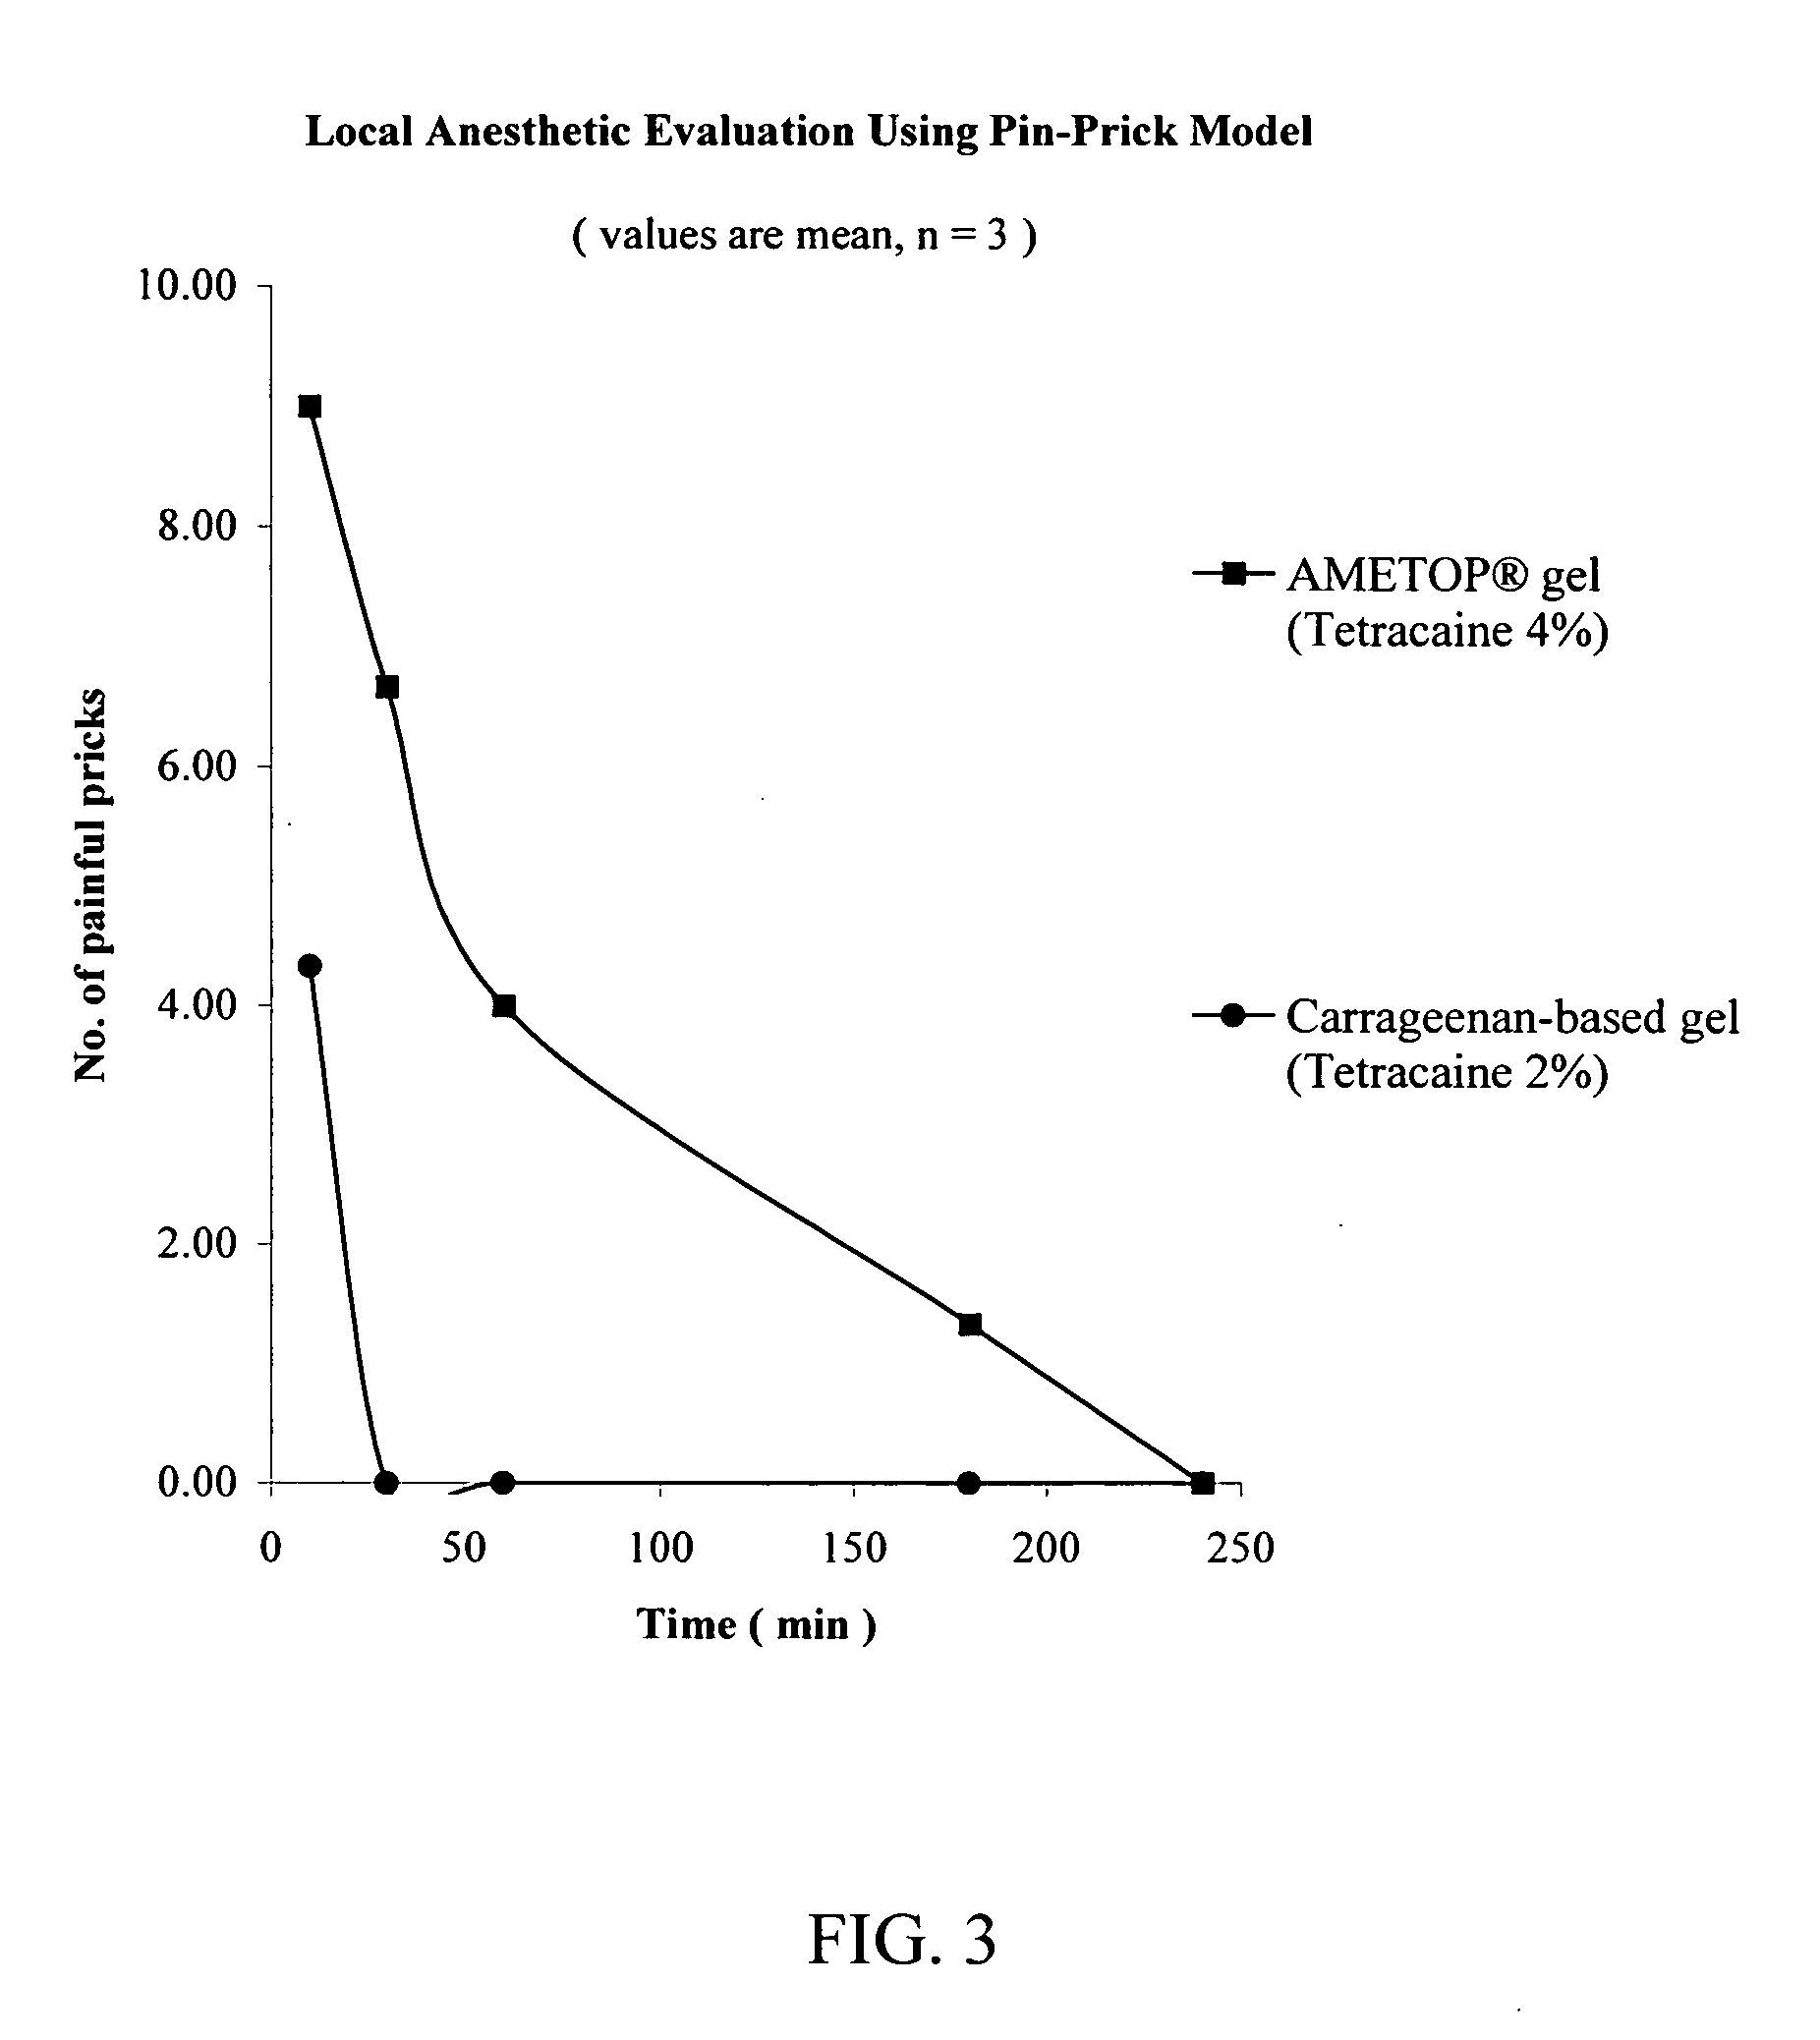 Compositions and delivery systems for administration of a local anesthetic agent